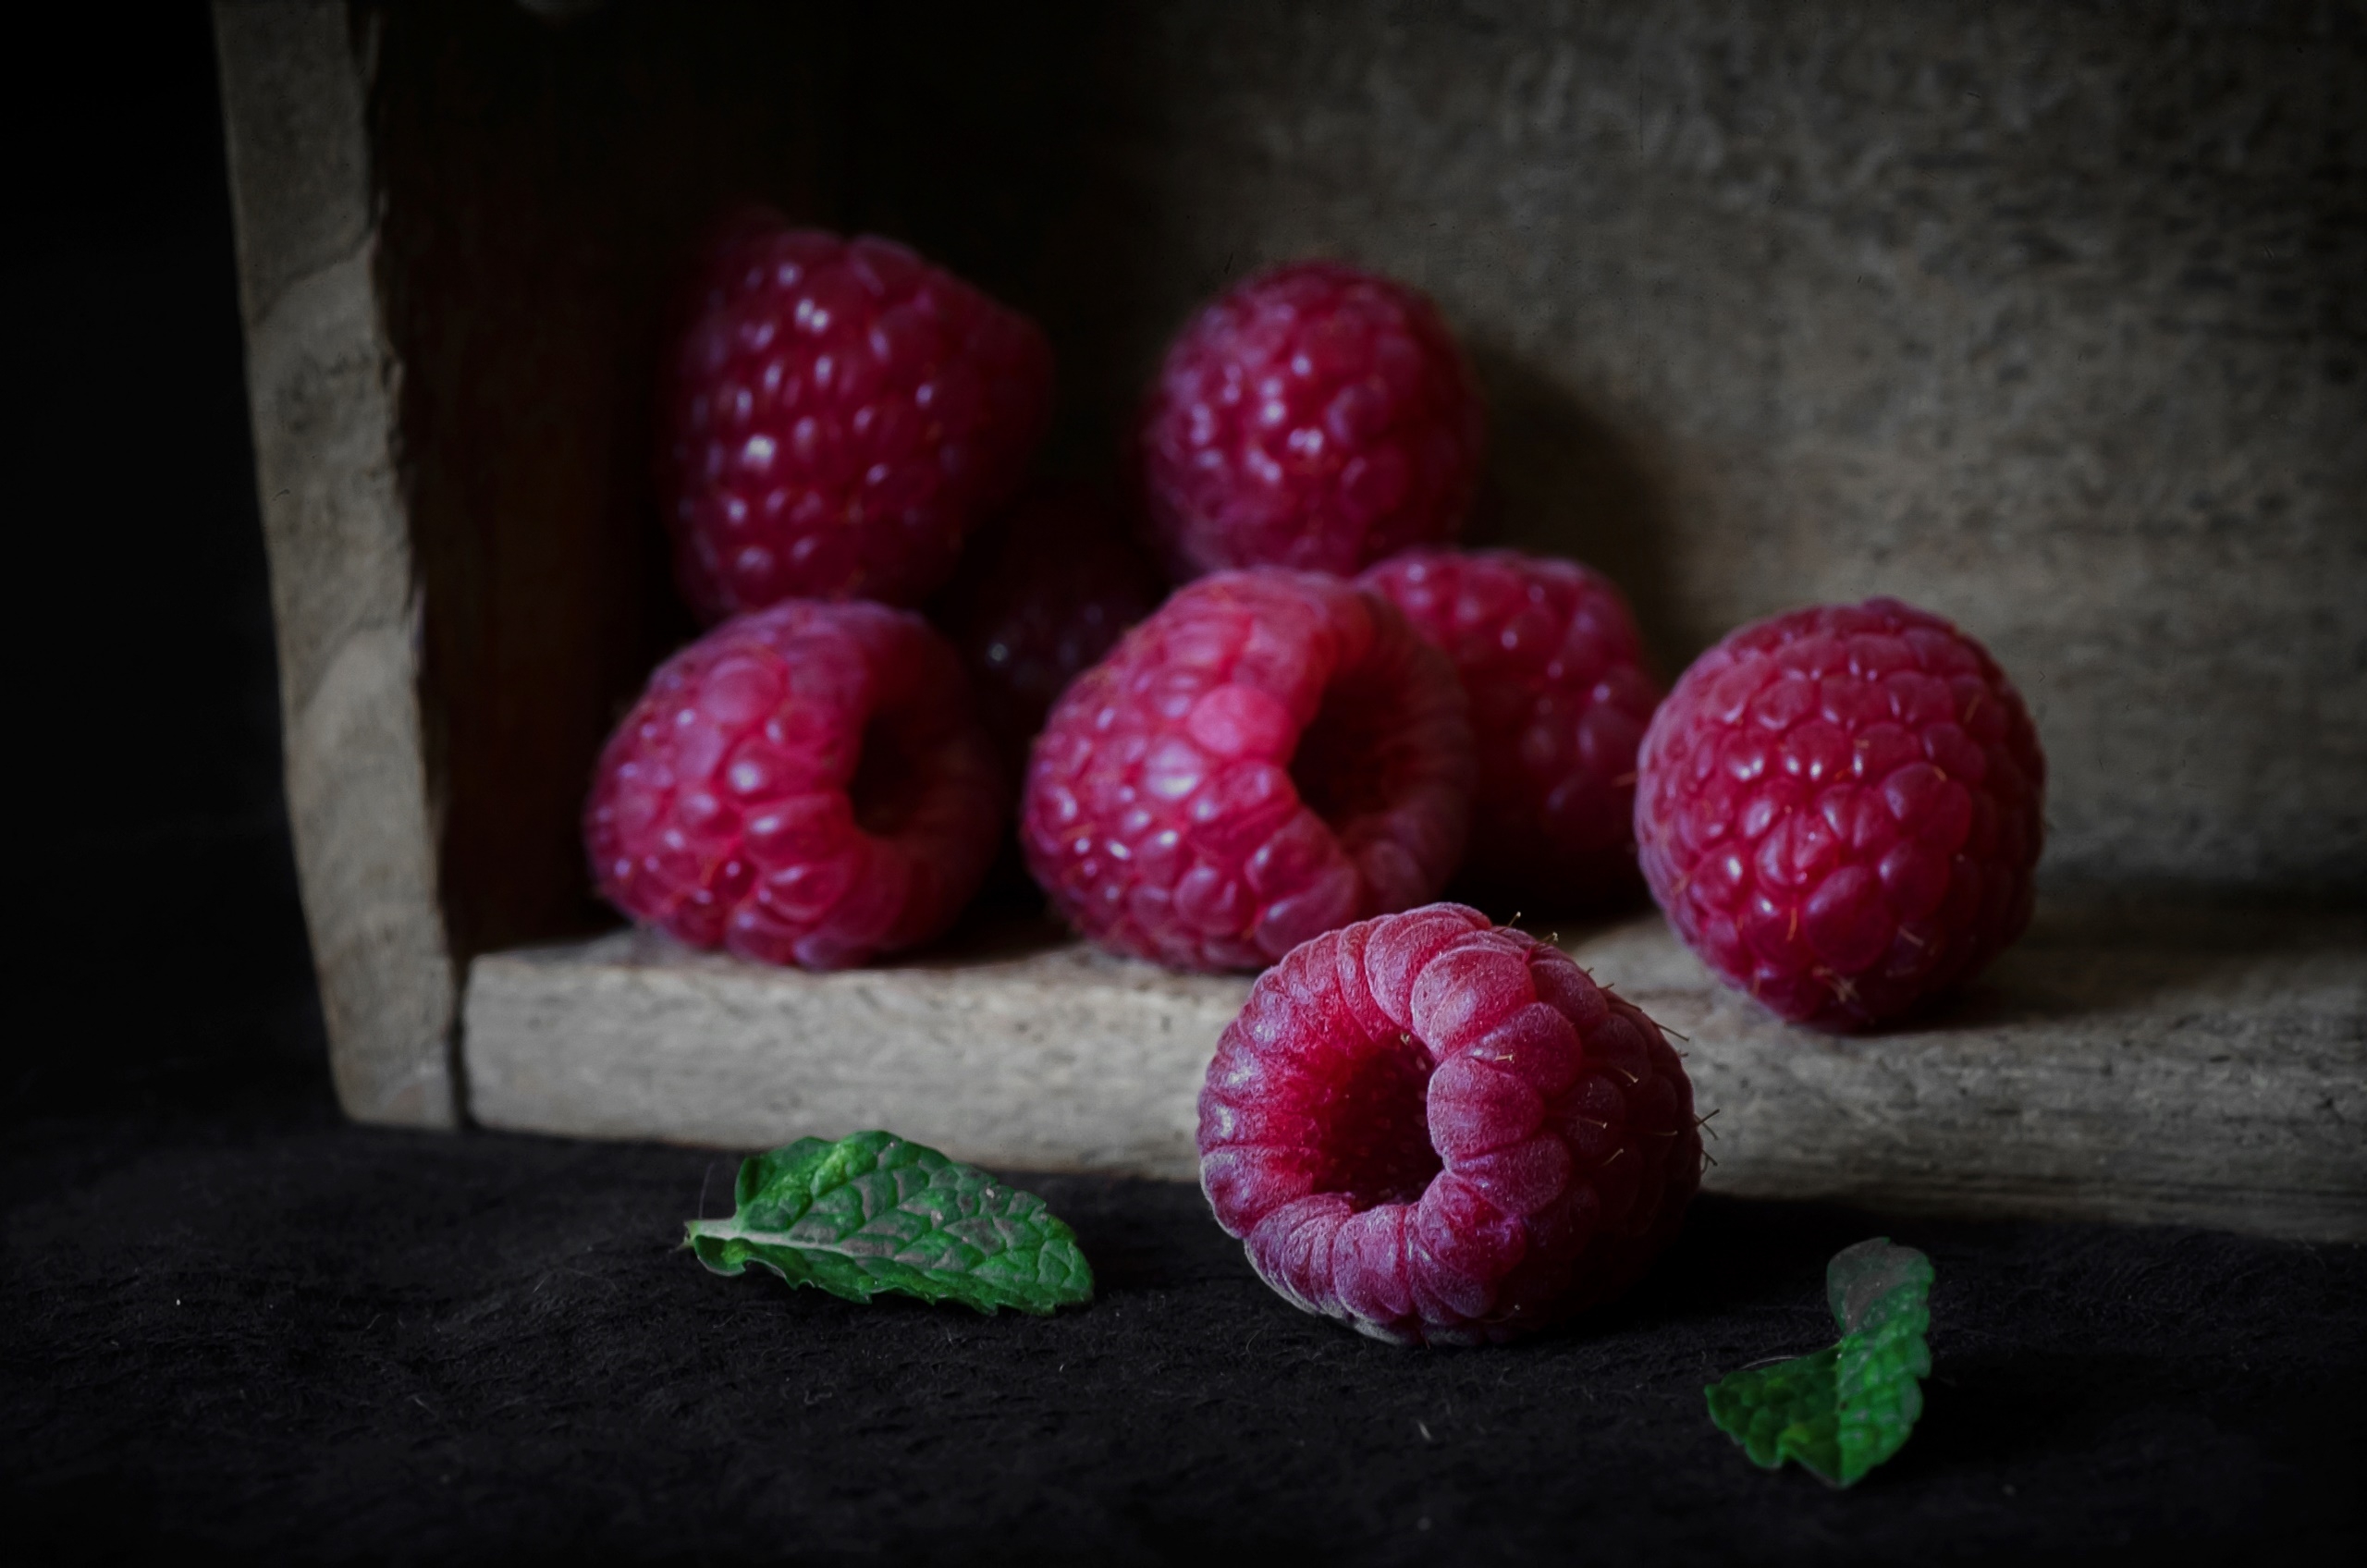 Fresh raspberries scattered on the table